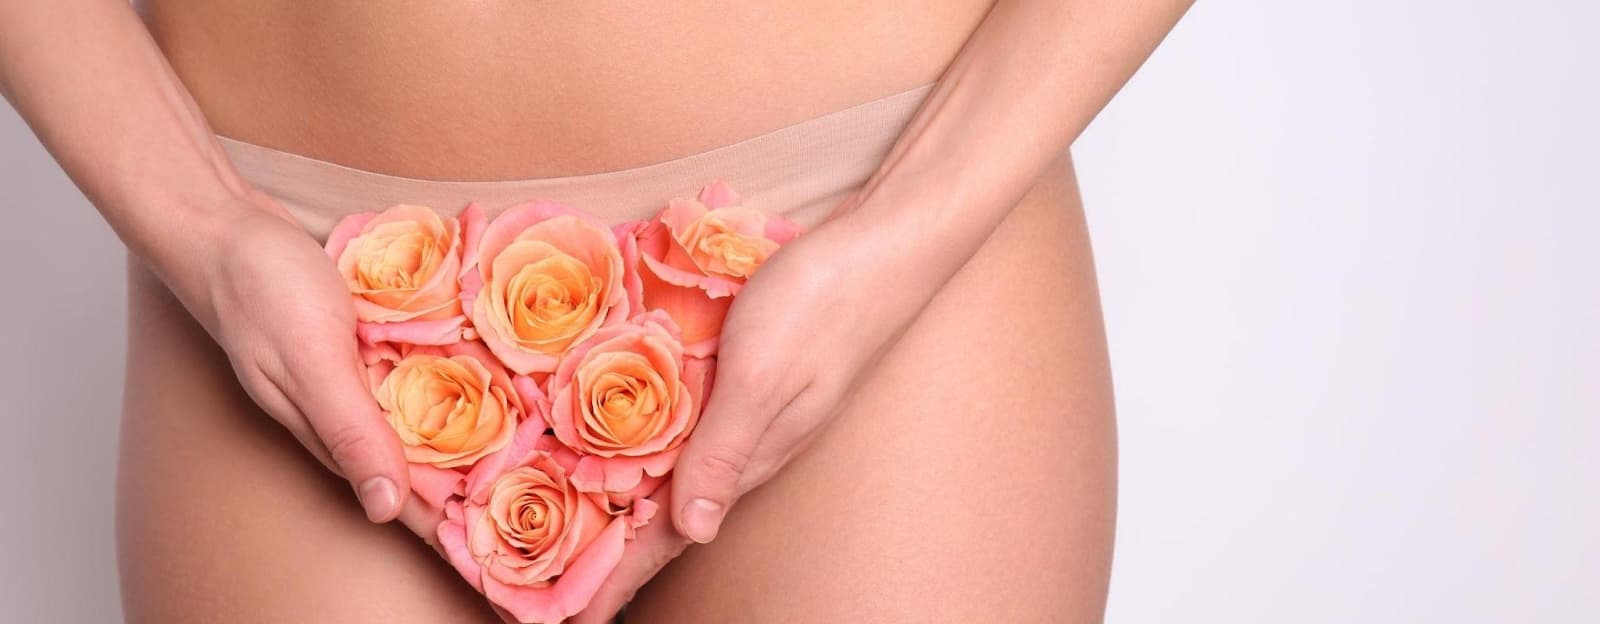 A girl stands and holds roses near her panties